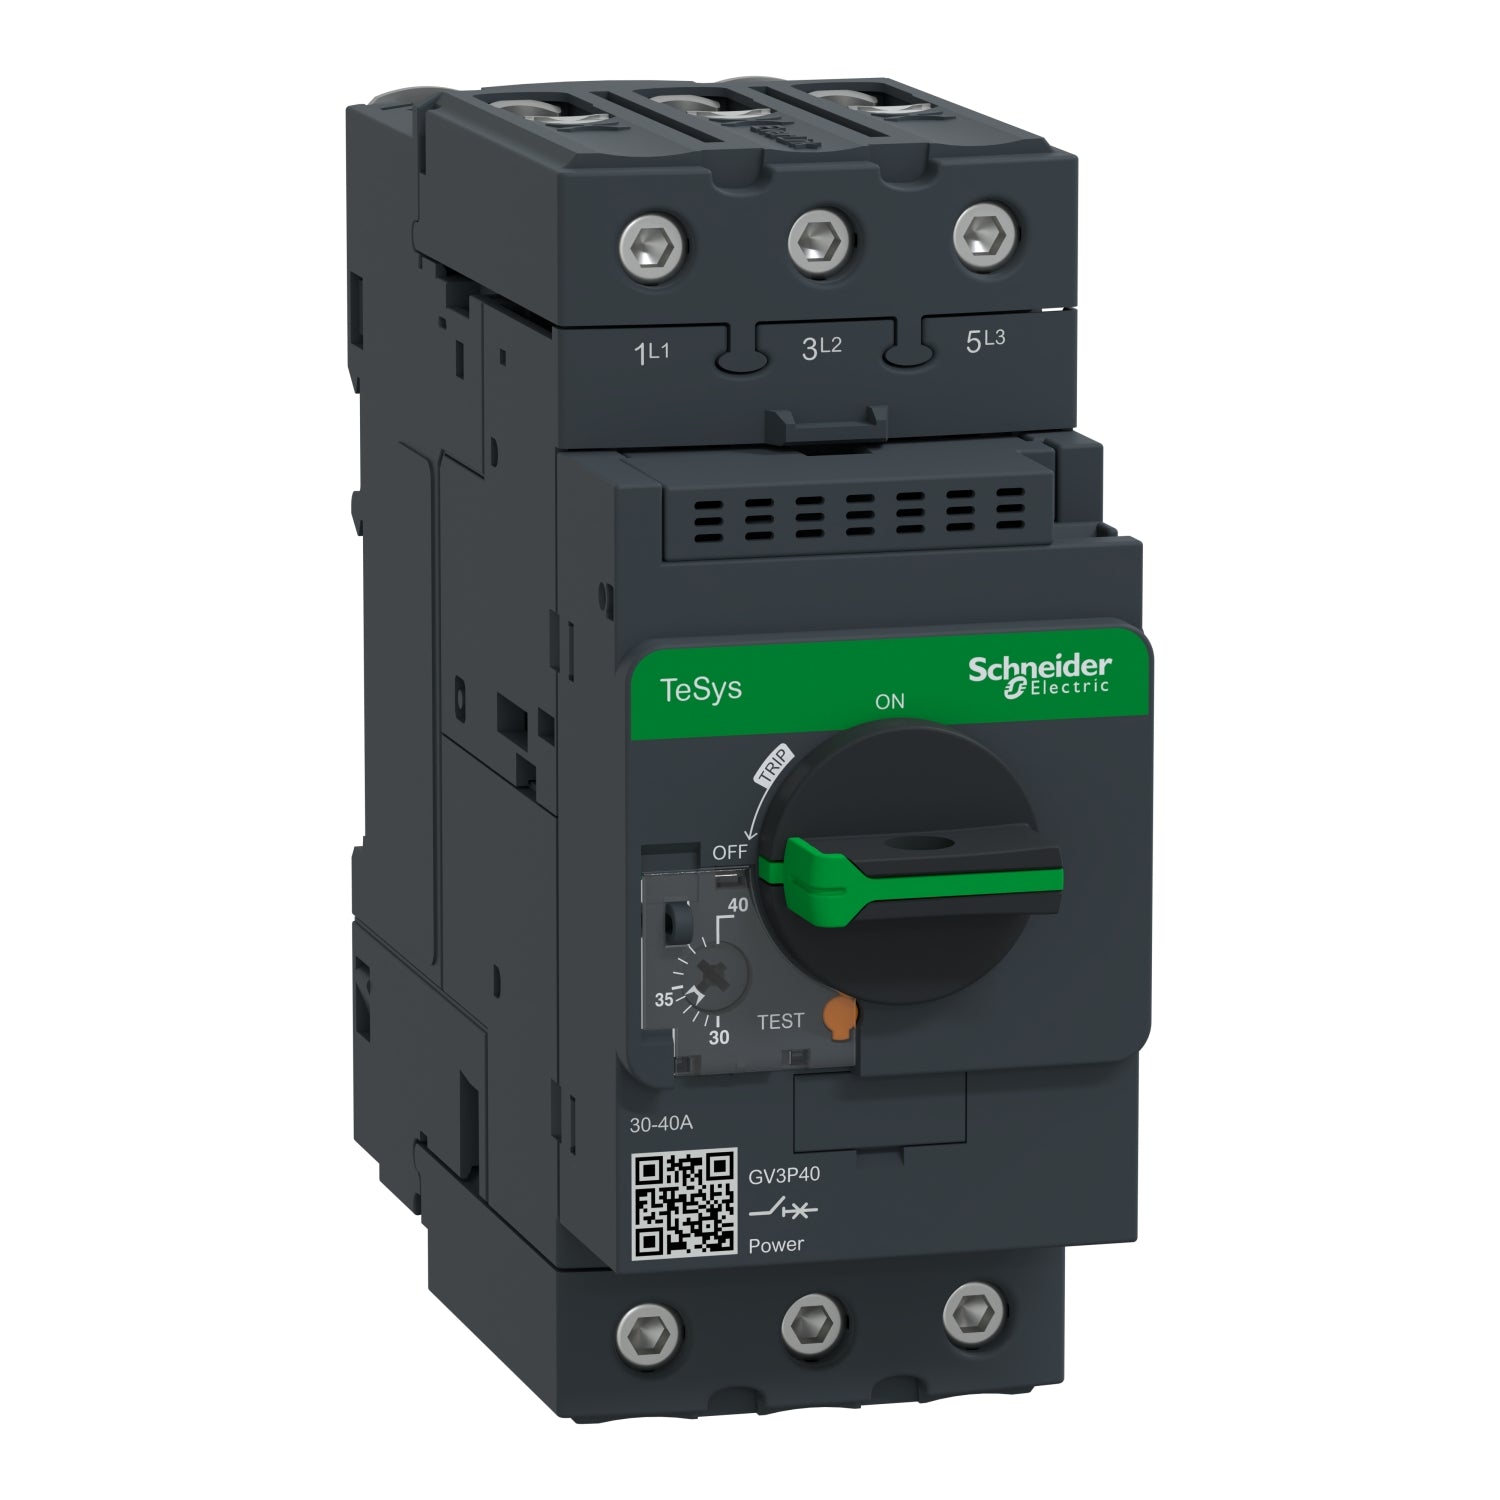 GV3P40 | Schneider Electric | Manual Starter and Protector